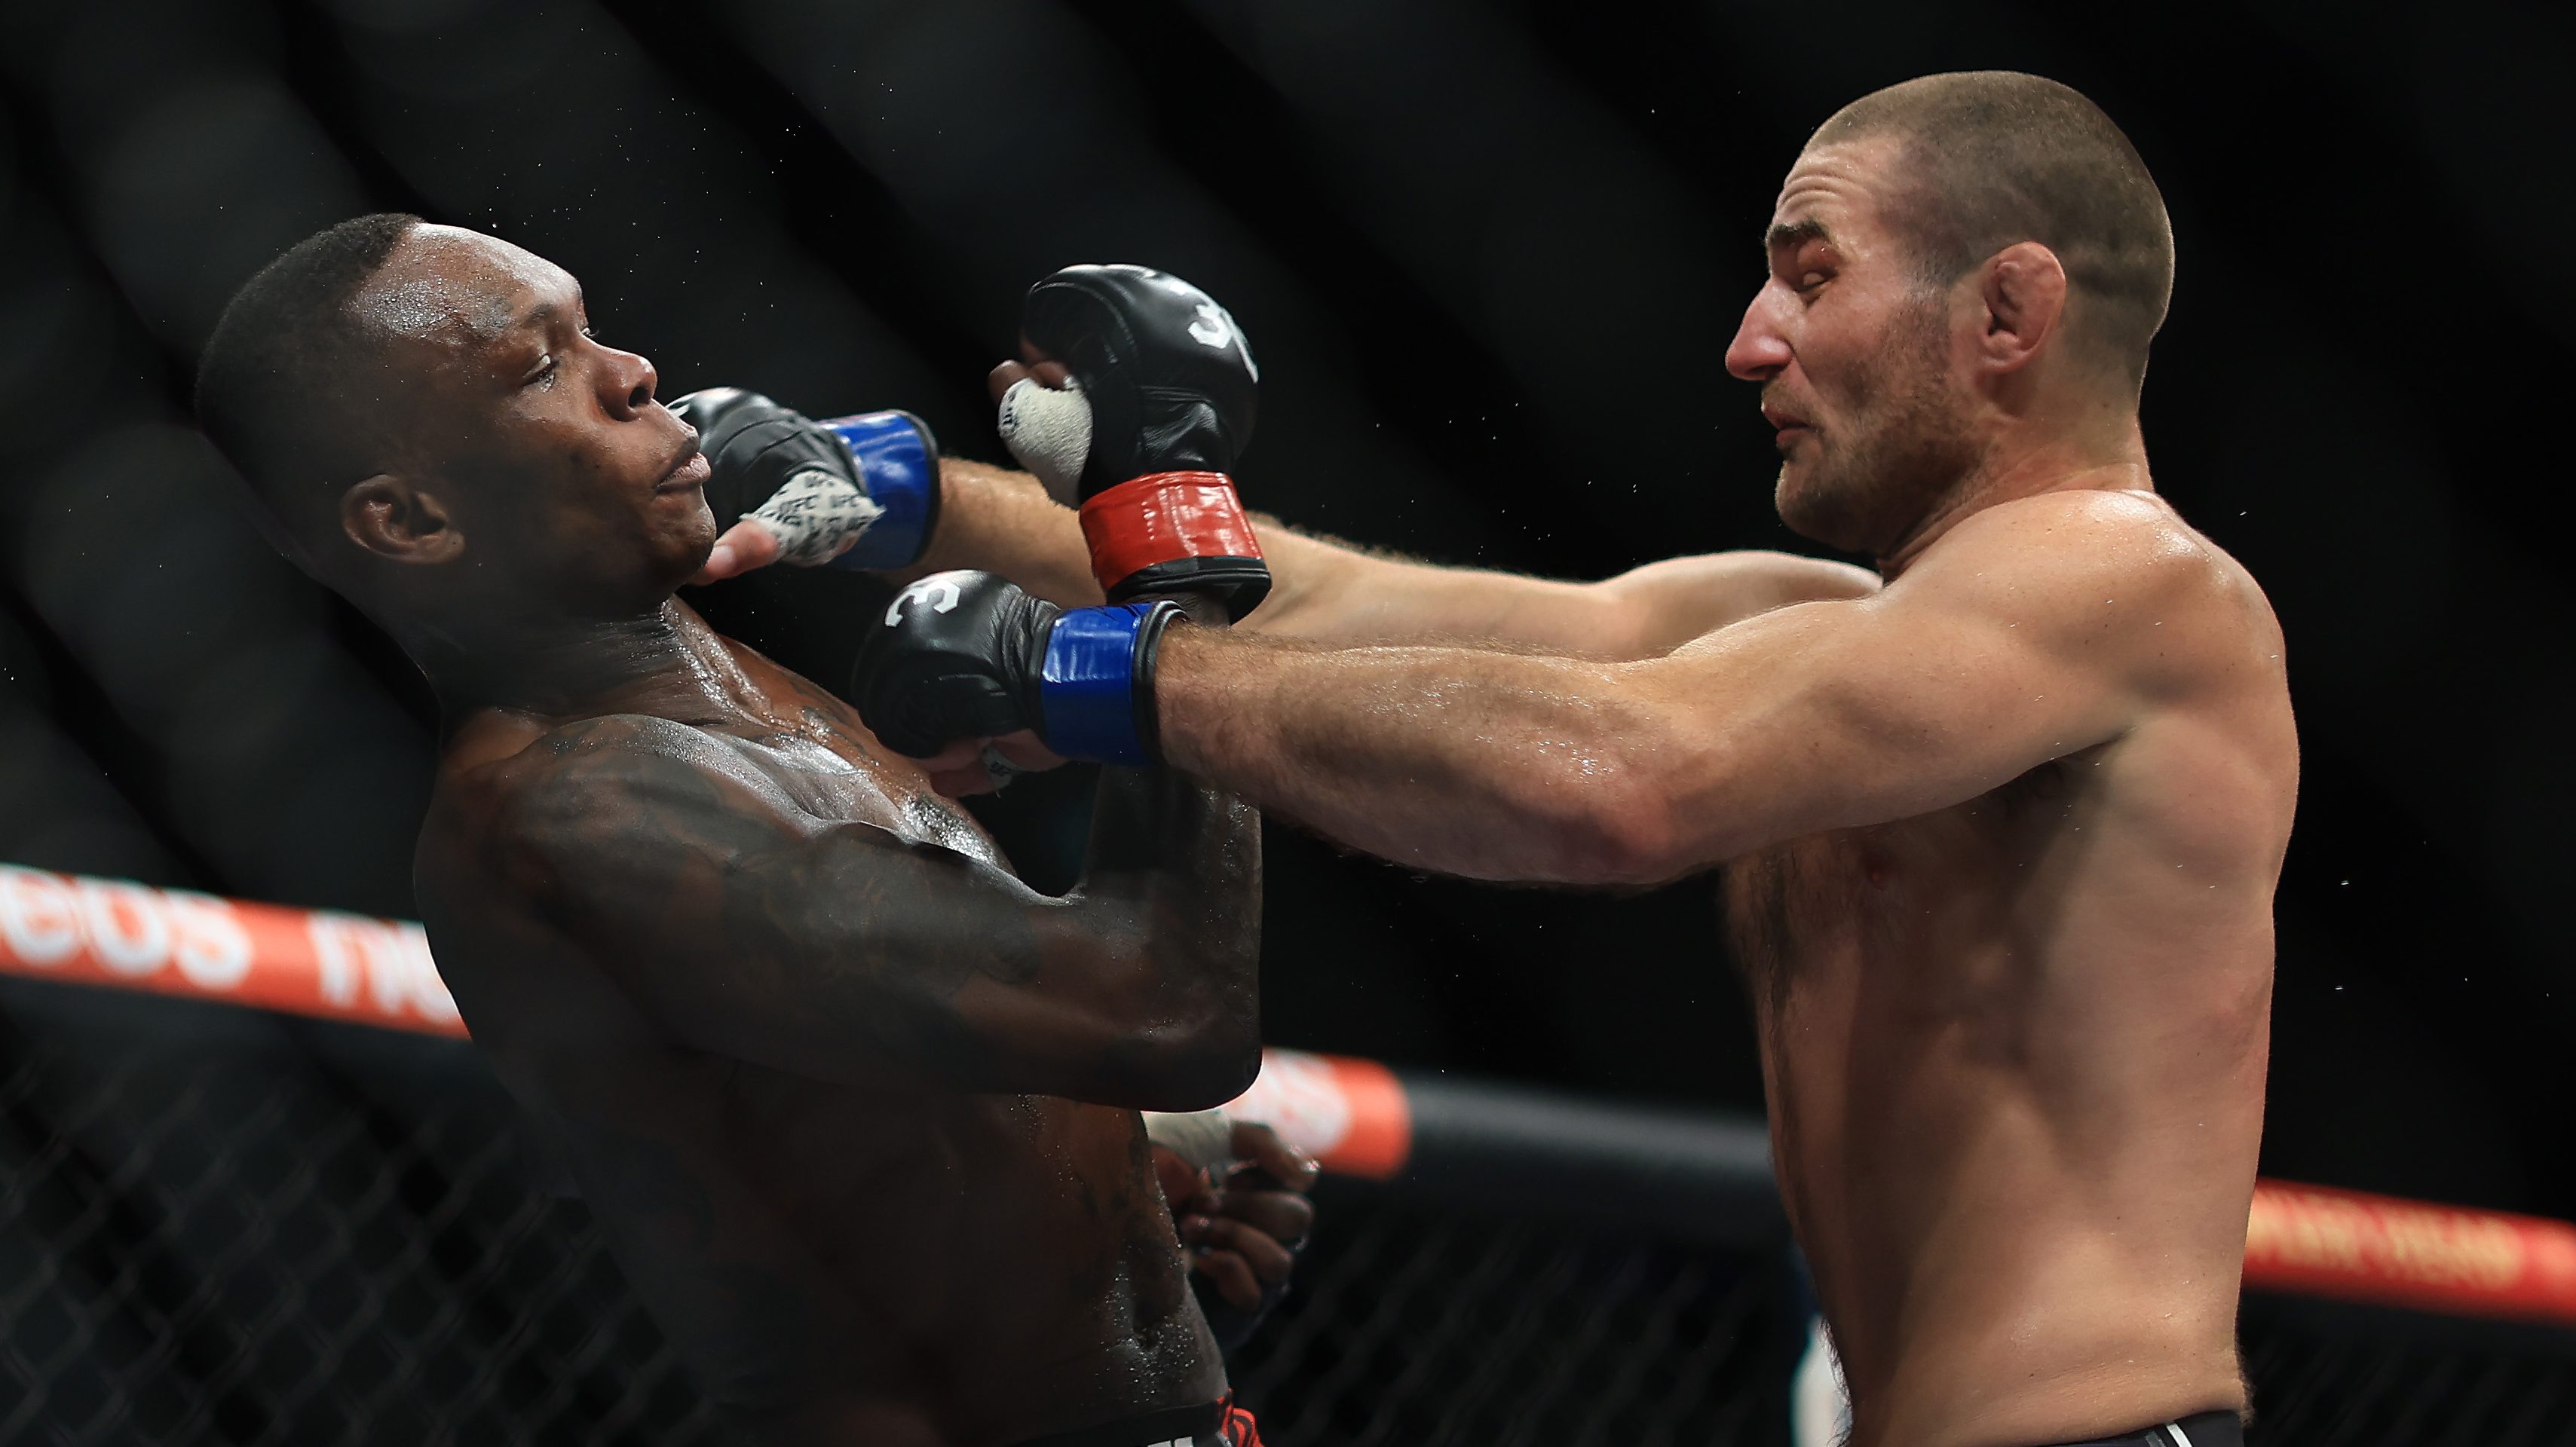 Dustin Poirier's UFC Opportunity Roasted by Reigning Champion